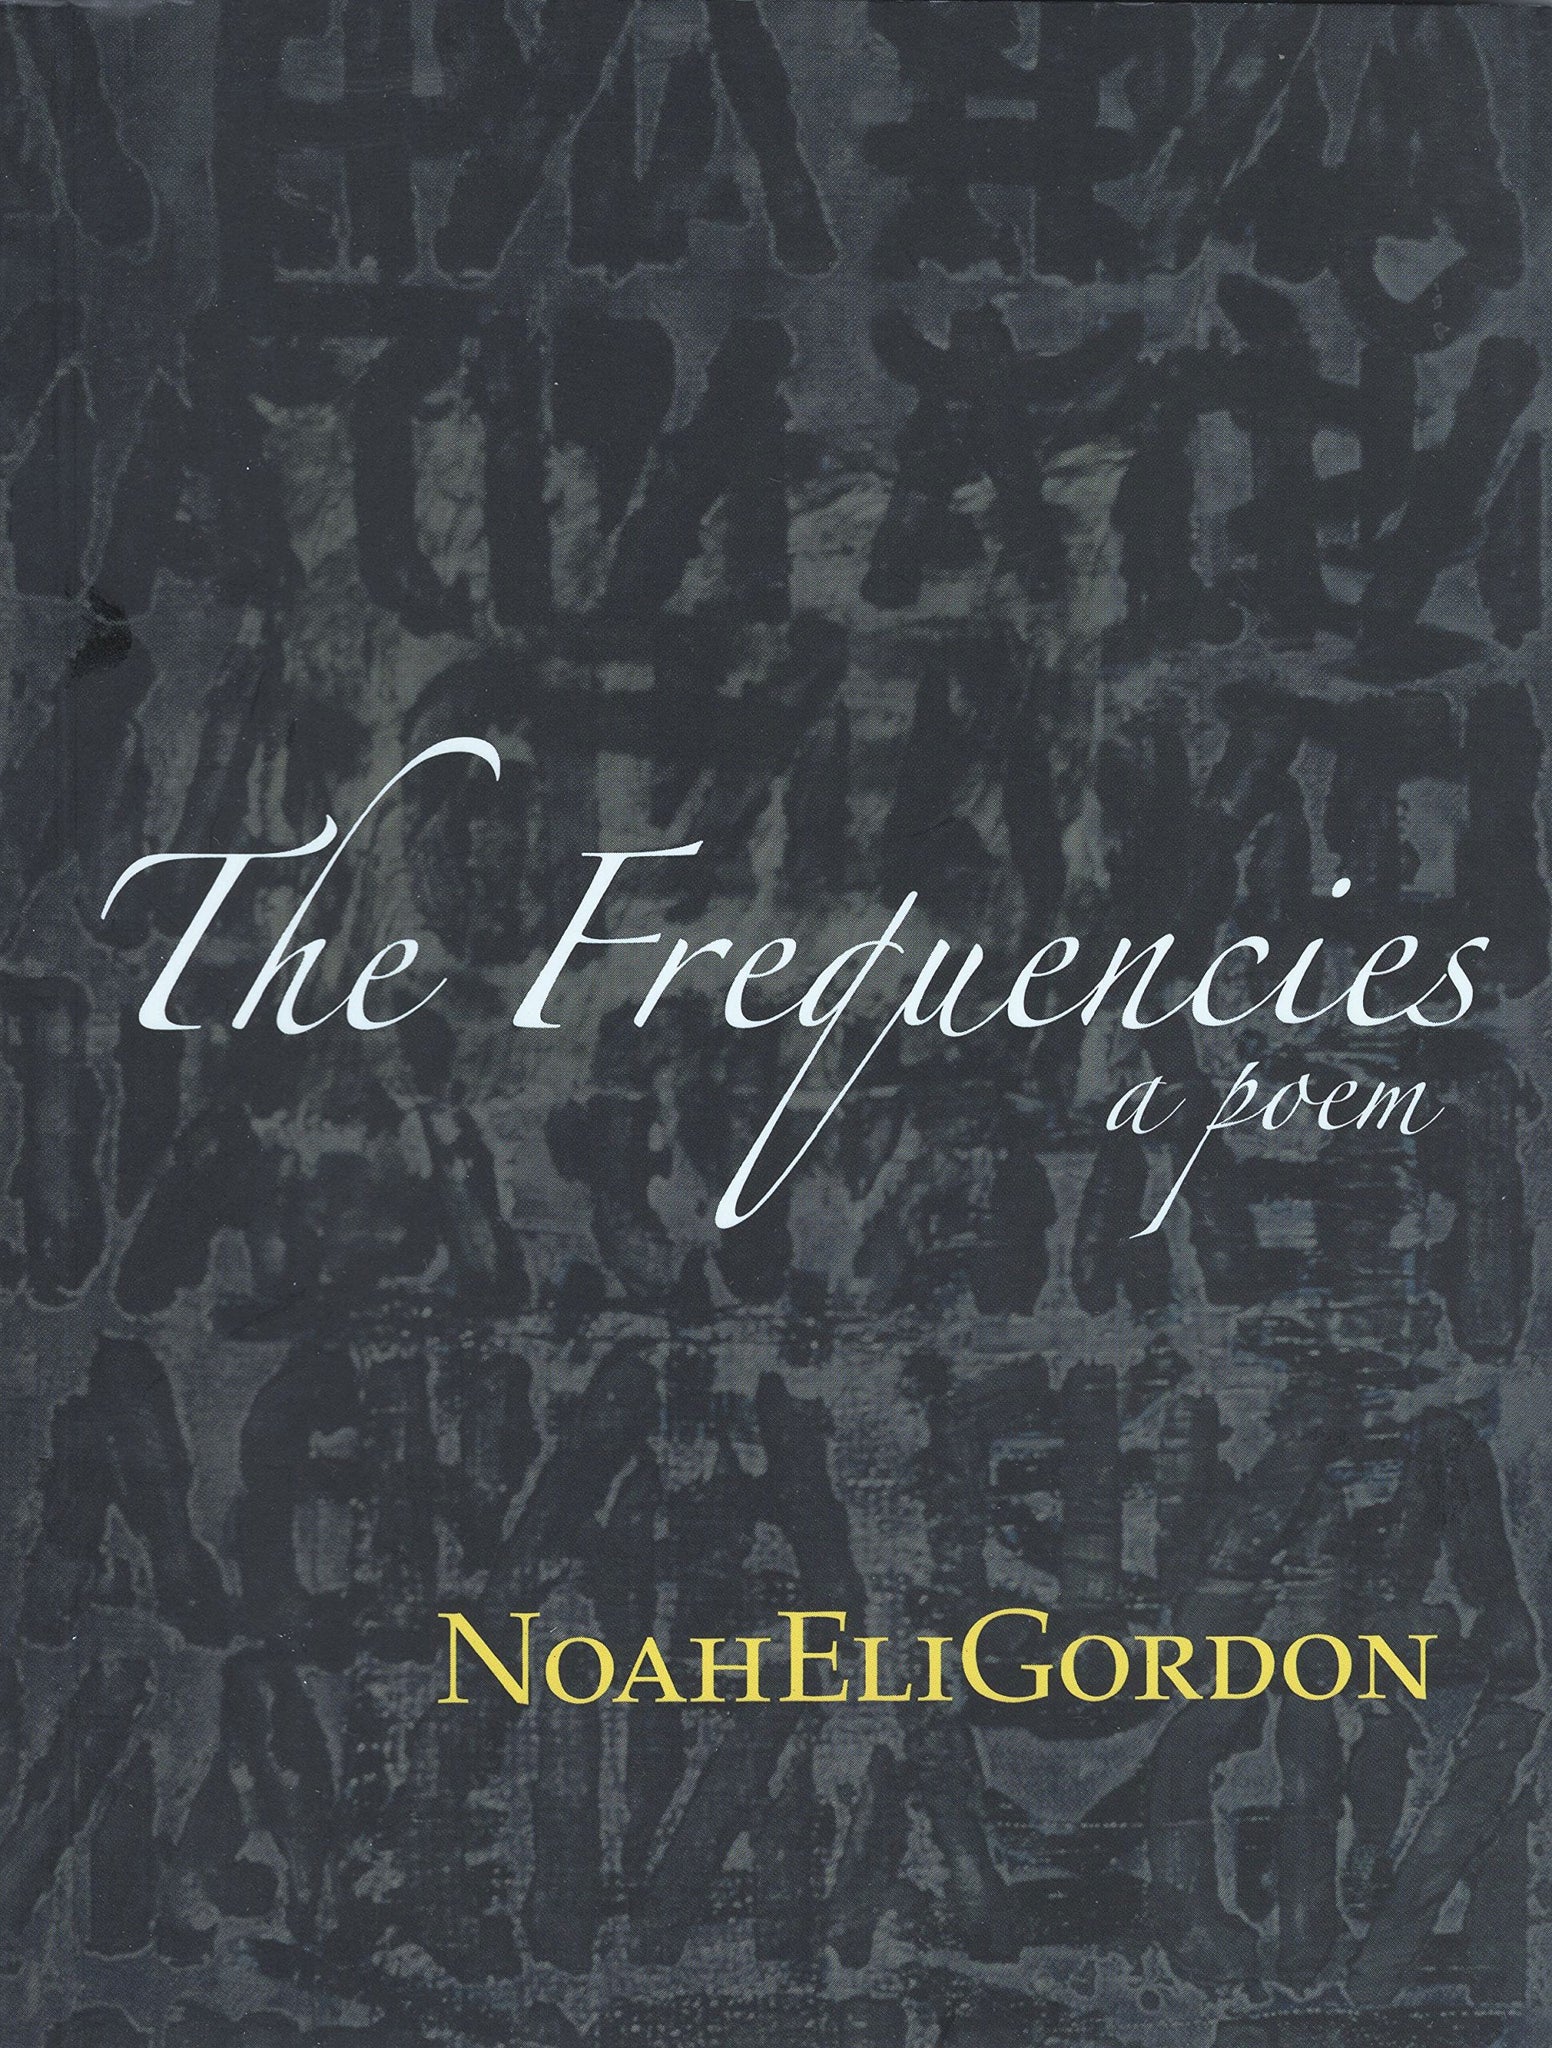 The Frequencies: A Poem